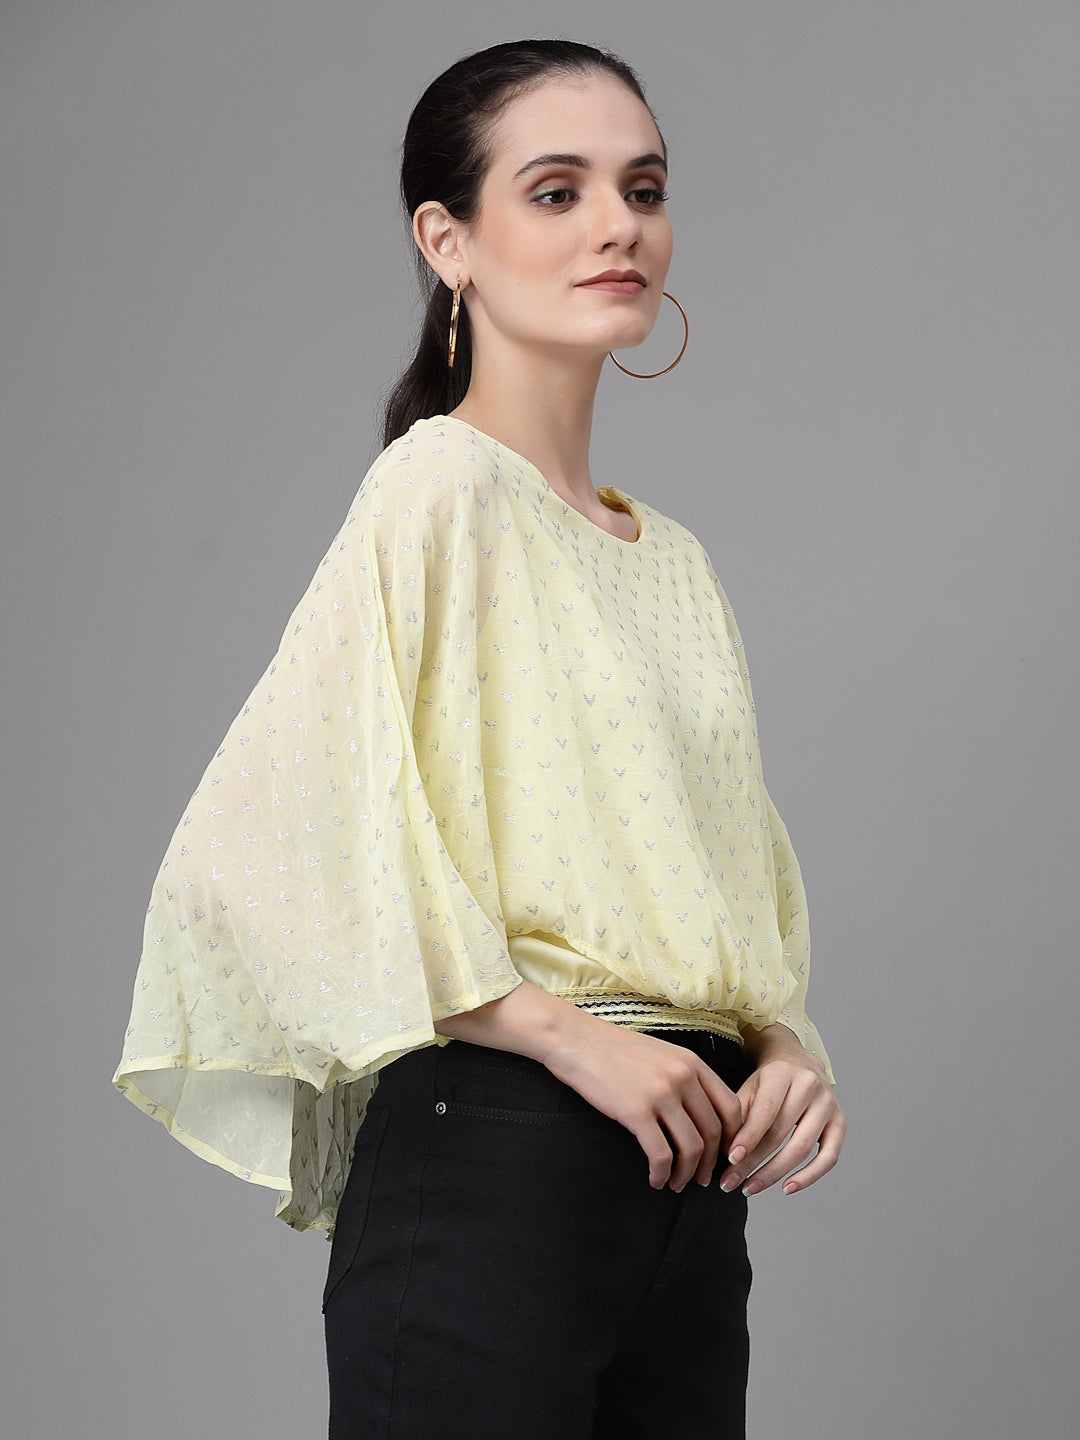 Women Flared Yellow Round Neck Blouse Top